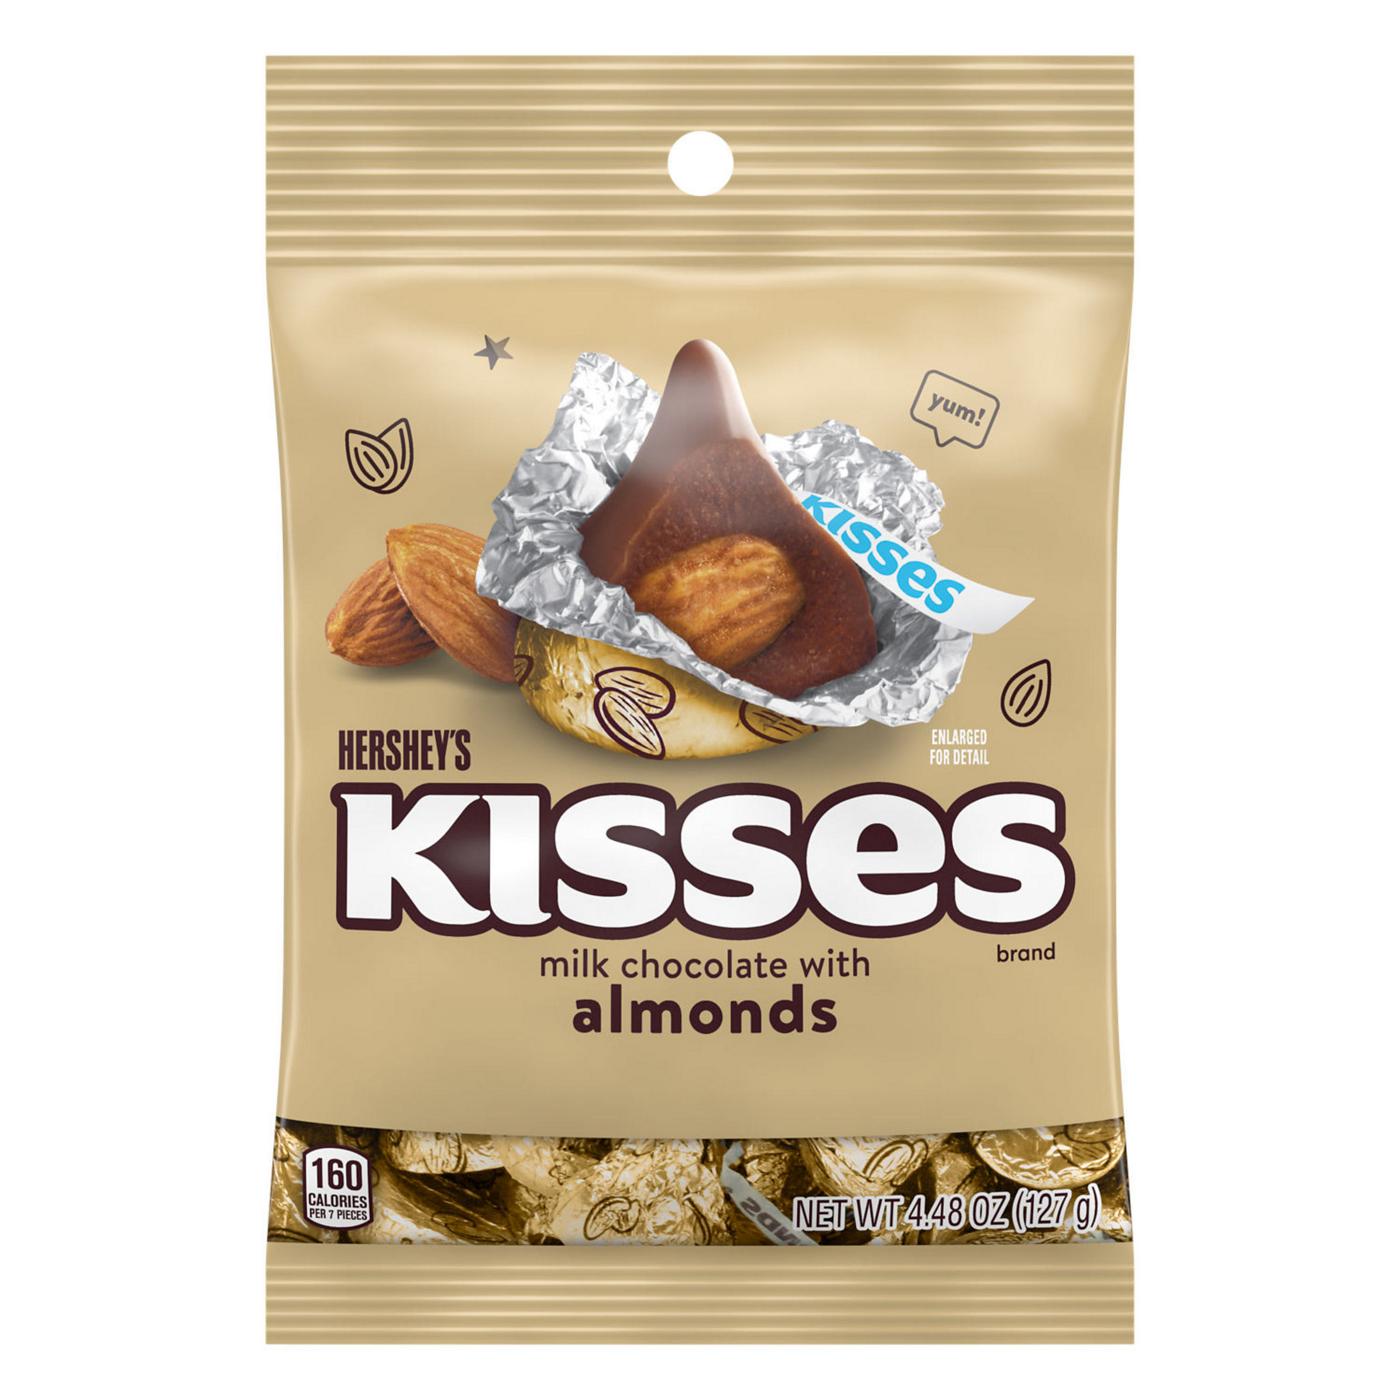 Hershey's Kisses Milk Chocolate with Almonds Candy; image 1 of 3